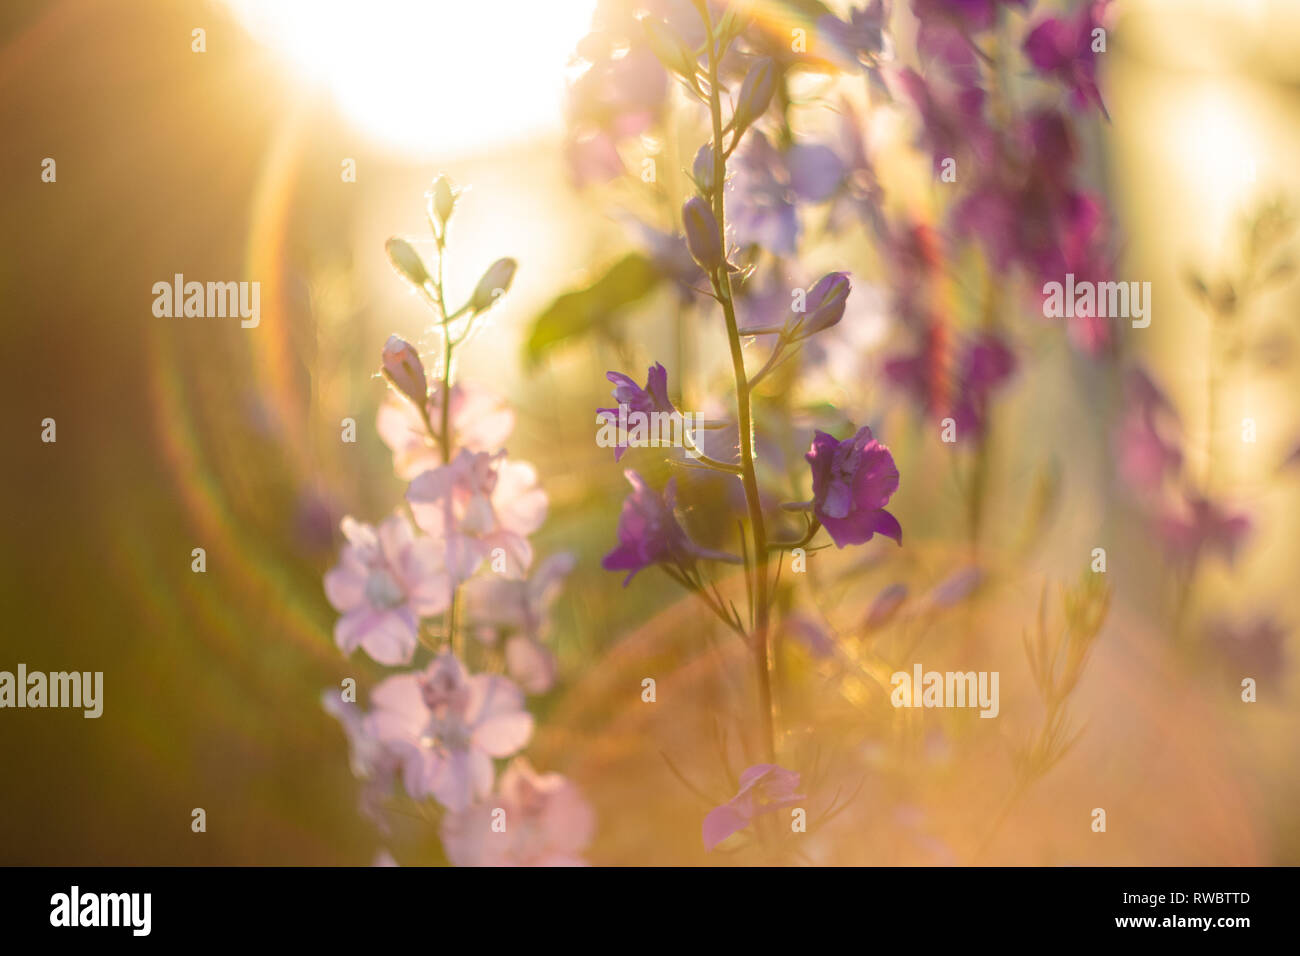 A flowers at the golden sunlight. The Sunset Time. Sun Shining Bright. A summertime pink and violet flowers at the sunset golden time Stock Photo